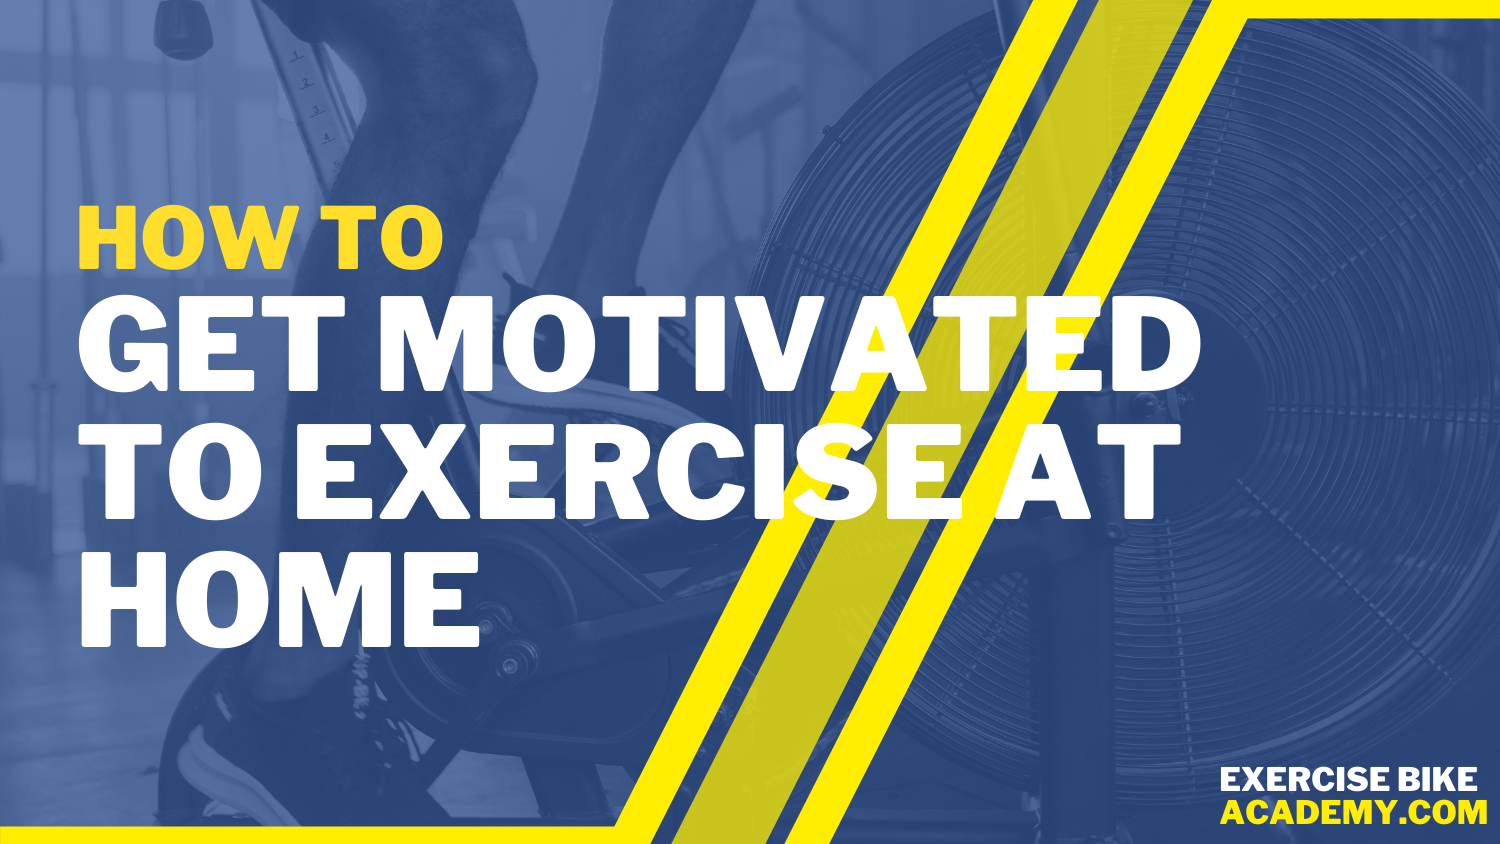 How to get motivated to exercise home